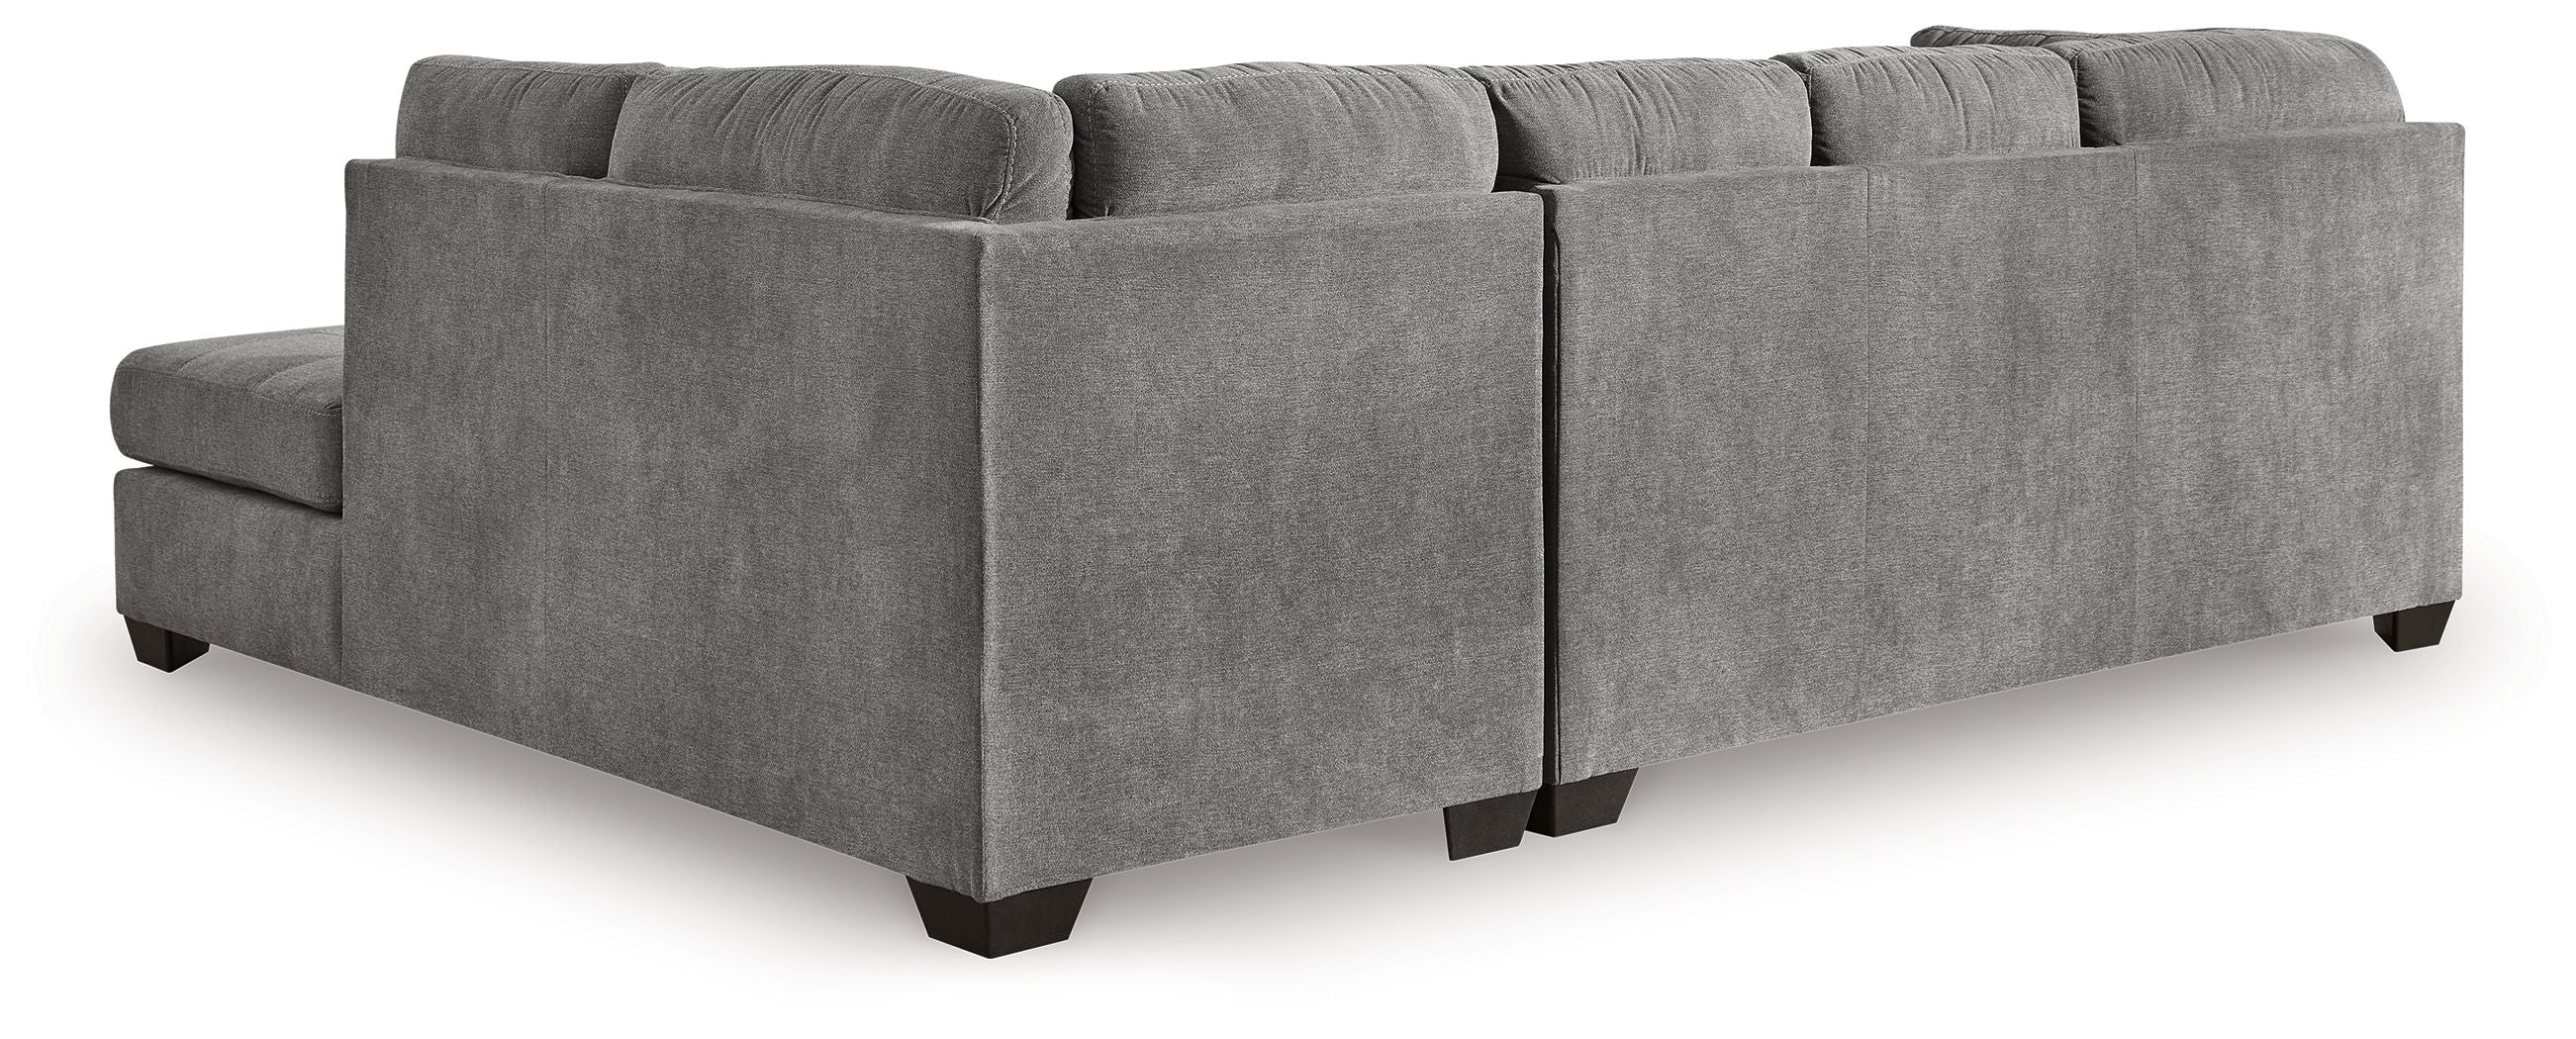 Marleton - Sleeper Sectional-Sleeper Sectionals-American Furniture Outlet